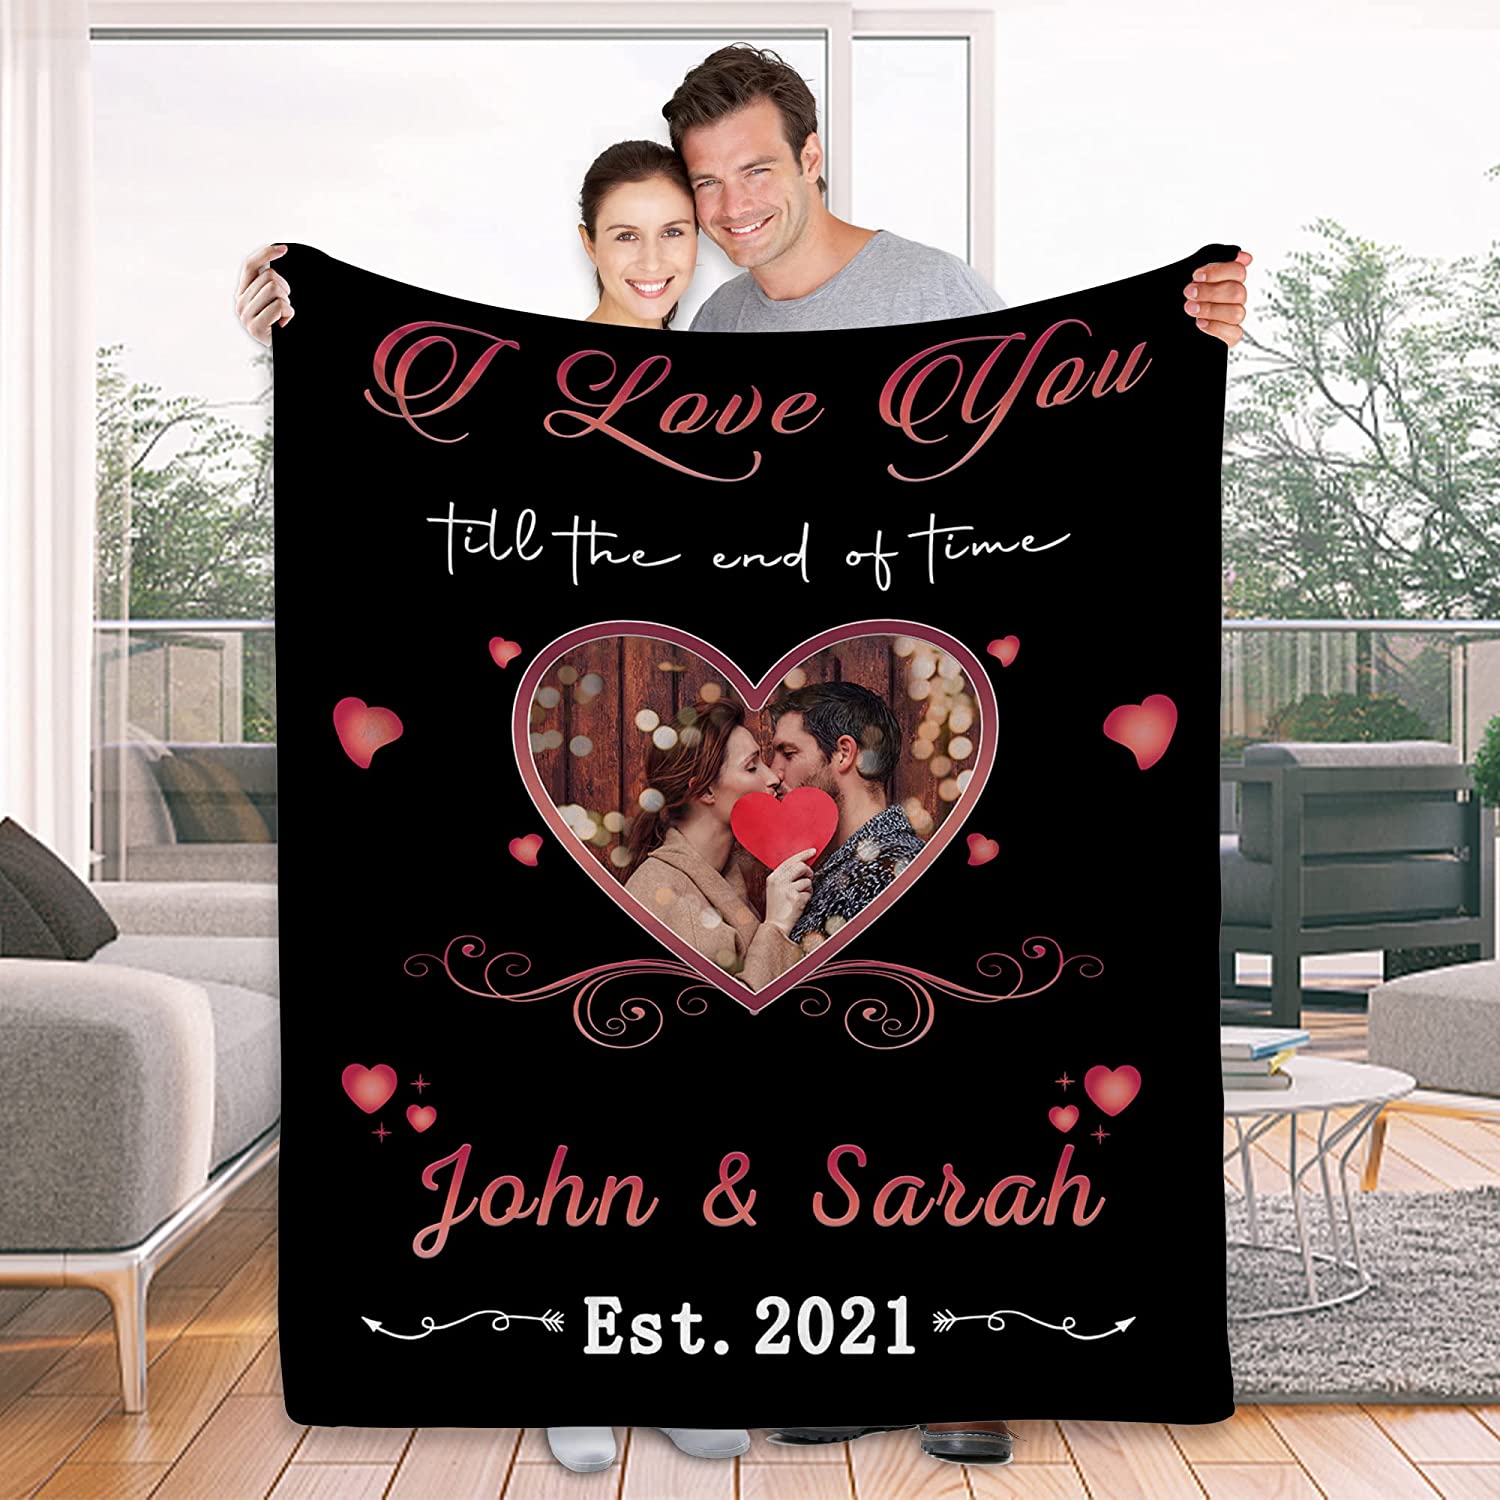 Personalized Couple Blanket - Custom Romantic Gift For Couple, Lover, Husband, Wife - Gifts for Newlyweds, Birthday, Anniversary Wedding, Christmas, Valentine's Day Blanket